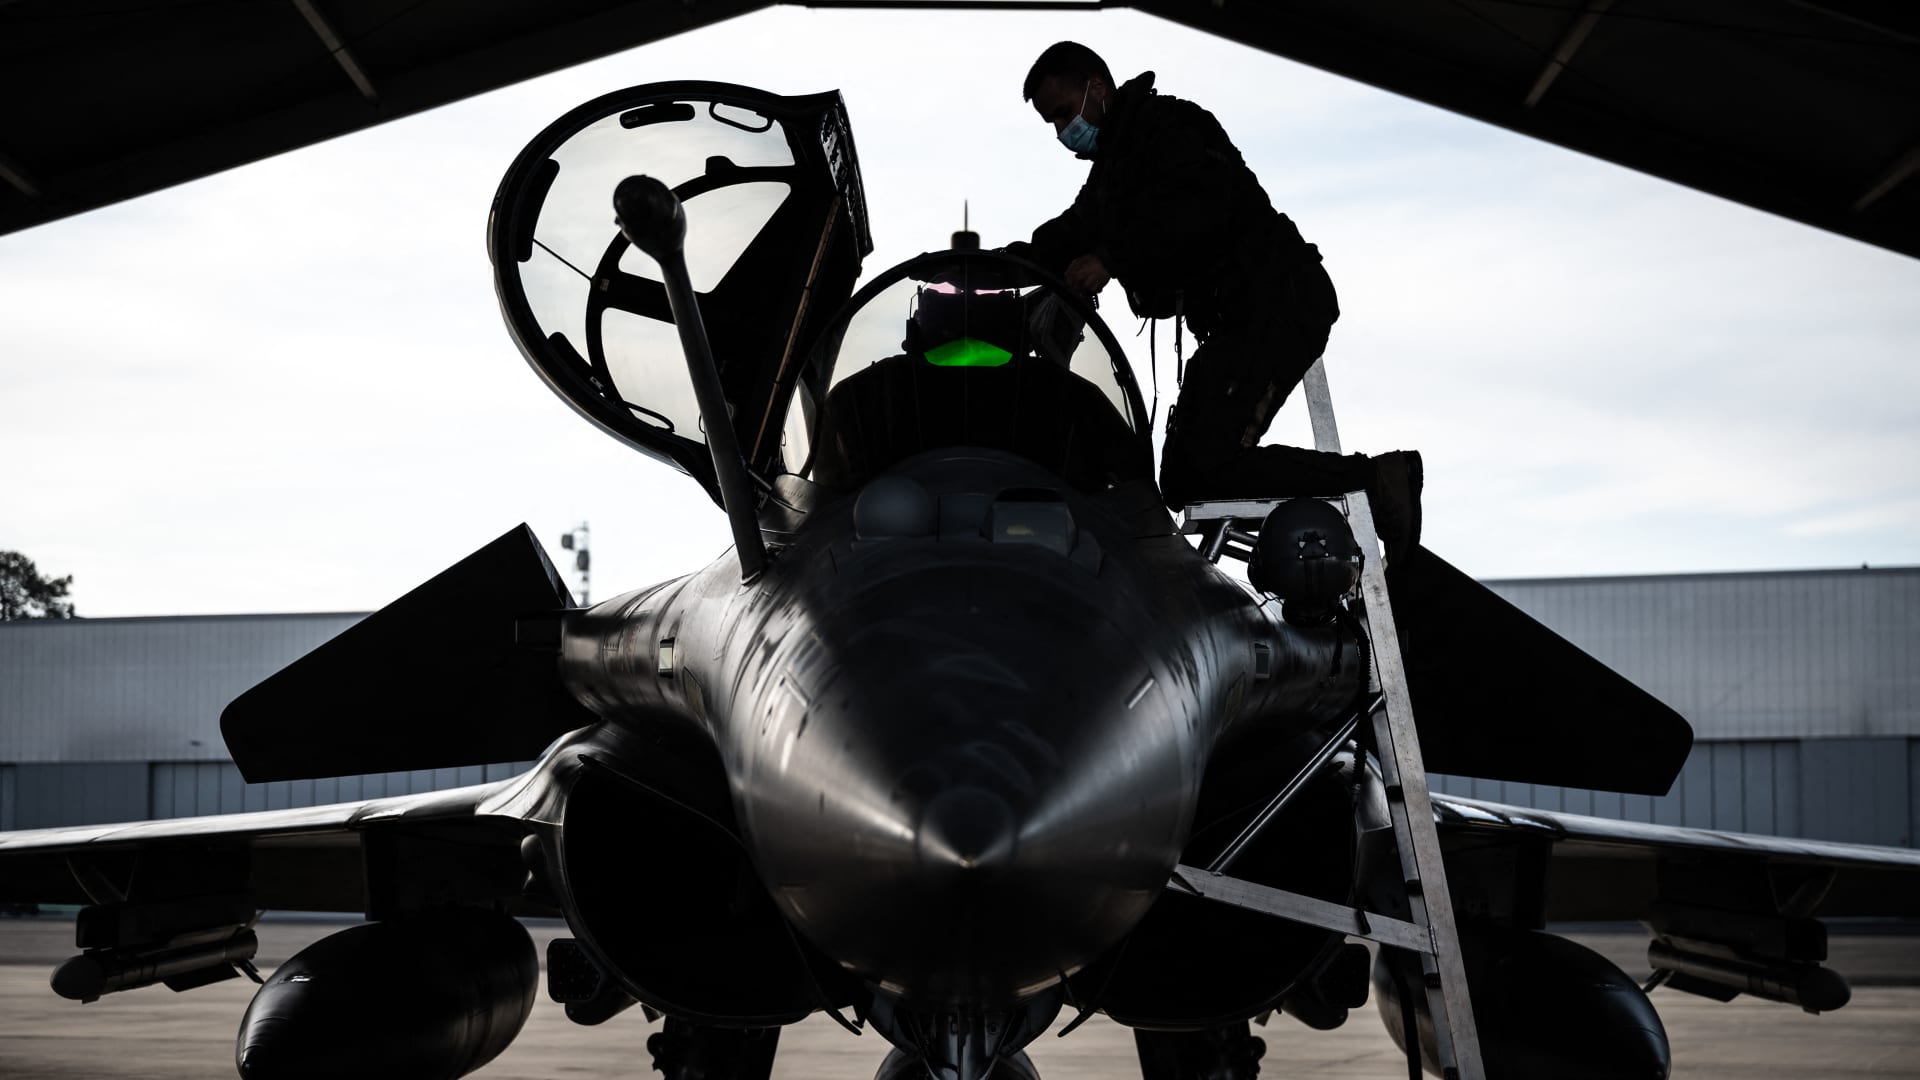 A Rafale fighter jet pilot inspects his aircraft prior to taking off for a daily NATO border watch mission sortie over Poland at the Mont-de-Marsan airbase, southwestern France, on March 1, 2022.